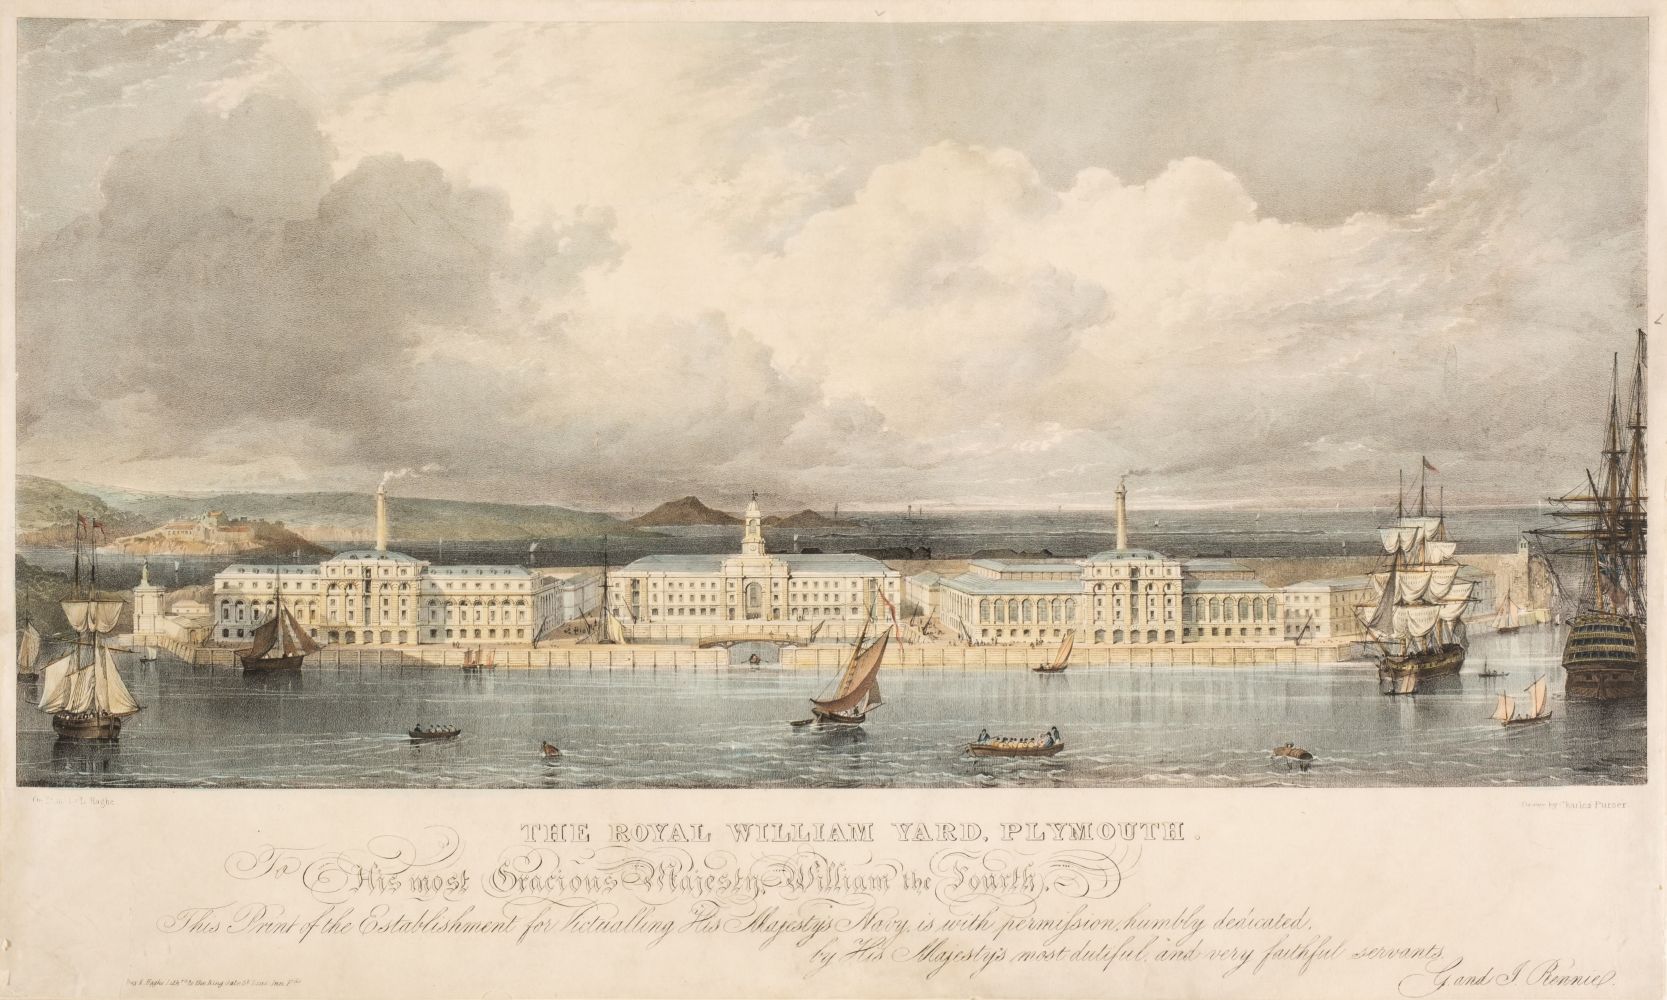 * Haghe (Louis). The Royal William Yard, Plymouth, London: Day & Haghe, circa 1830